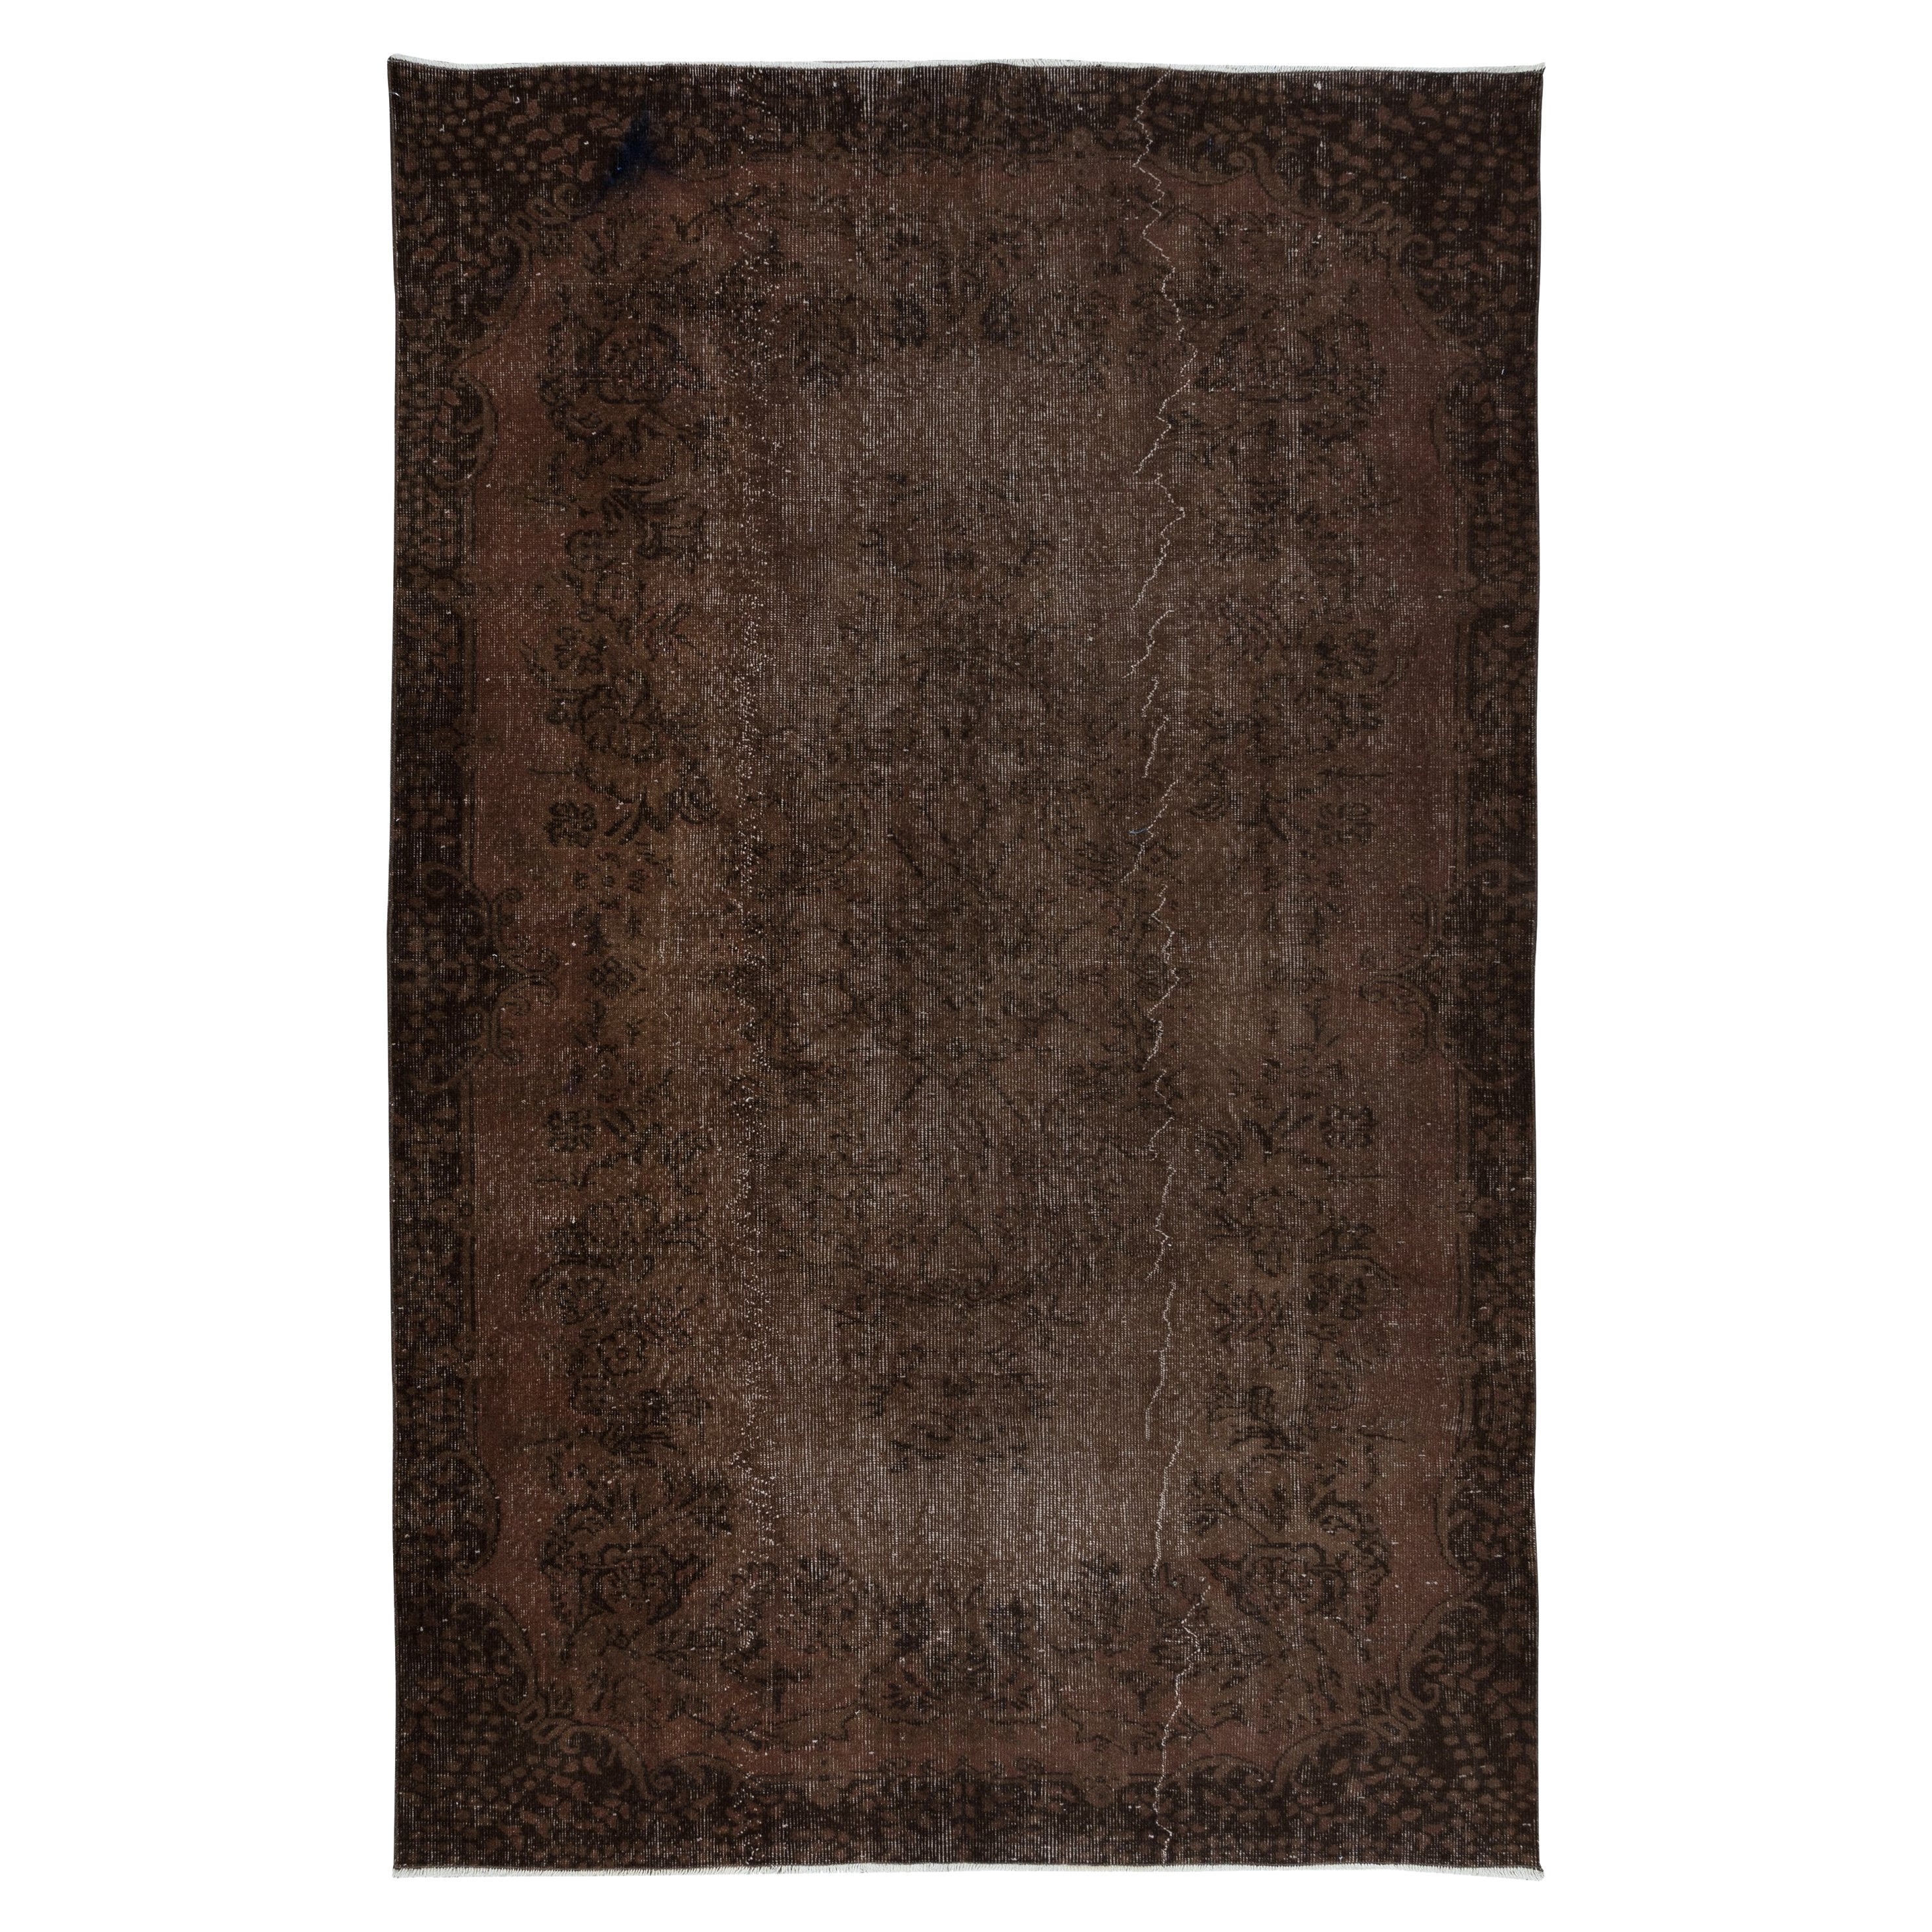 6x9.4 Ft Brown Wool Area Rug, Hand Knotted in Turkey, Great 4 Modern Interiors For Sale